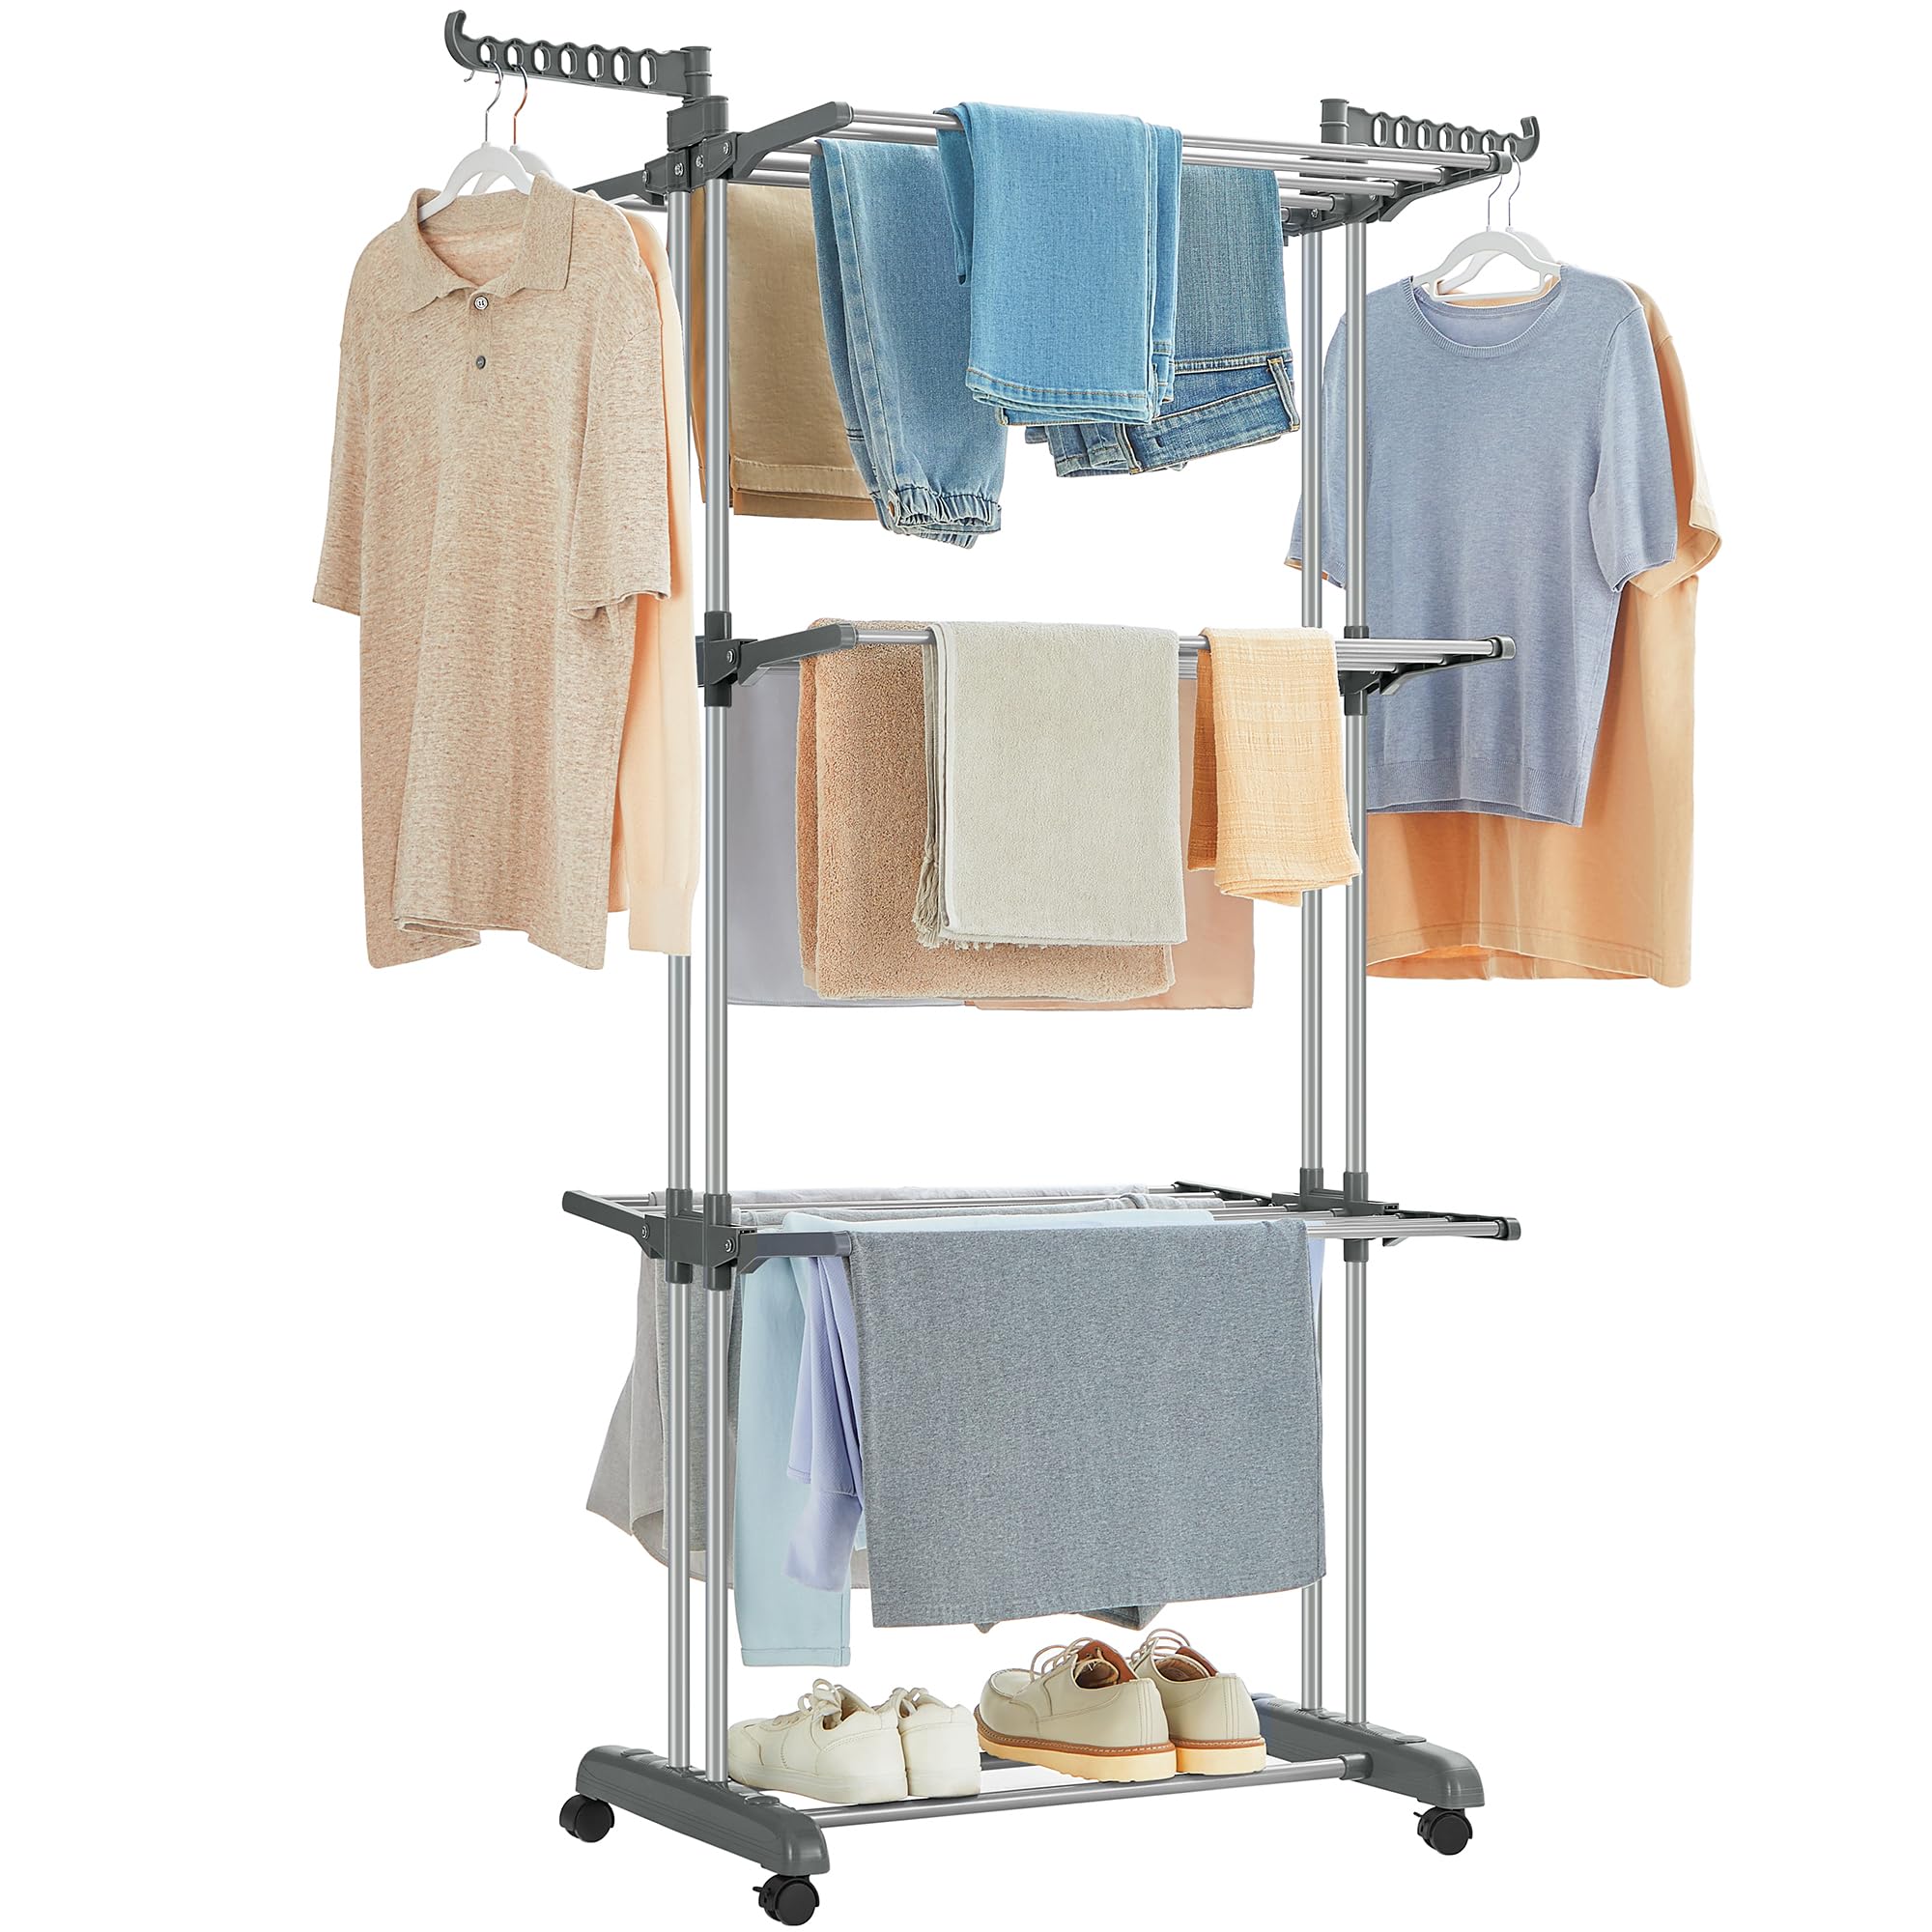 SONGMICS Clothes Drying Rack Stand 4-Tier, Foldable Laundry Drying Rack 67.7-Inch Tall, Stainless Steel, Rolling Clothes Horses Dryer Rack, Easy to Assemble $34.76